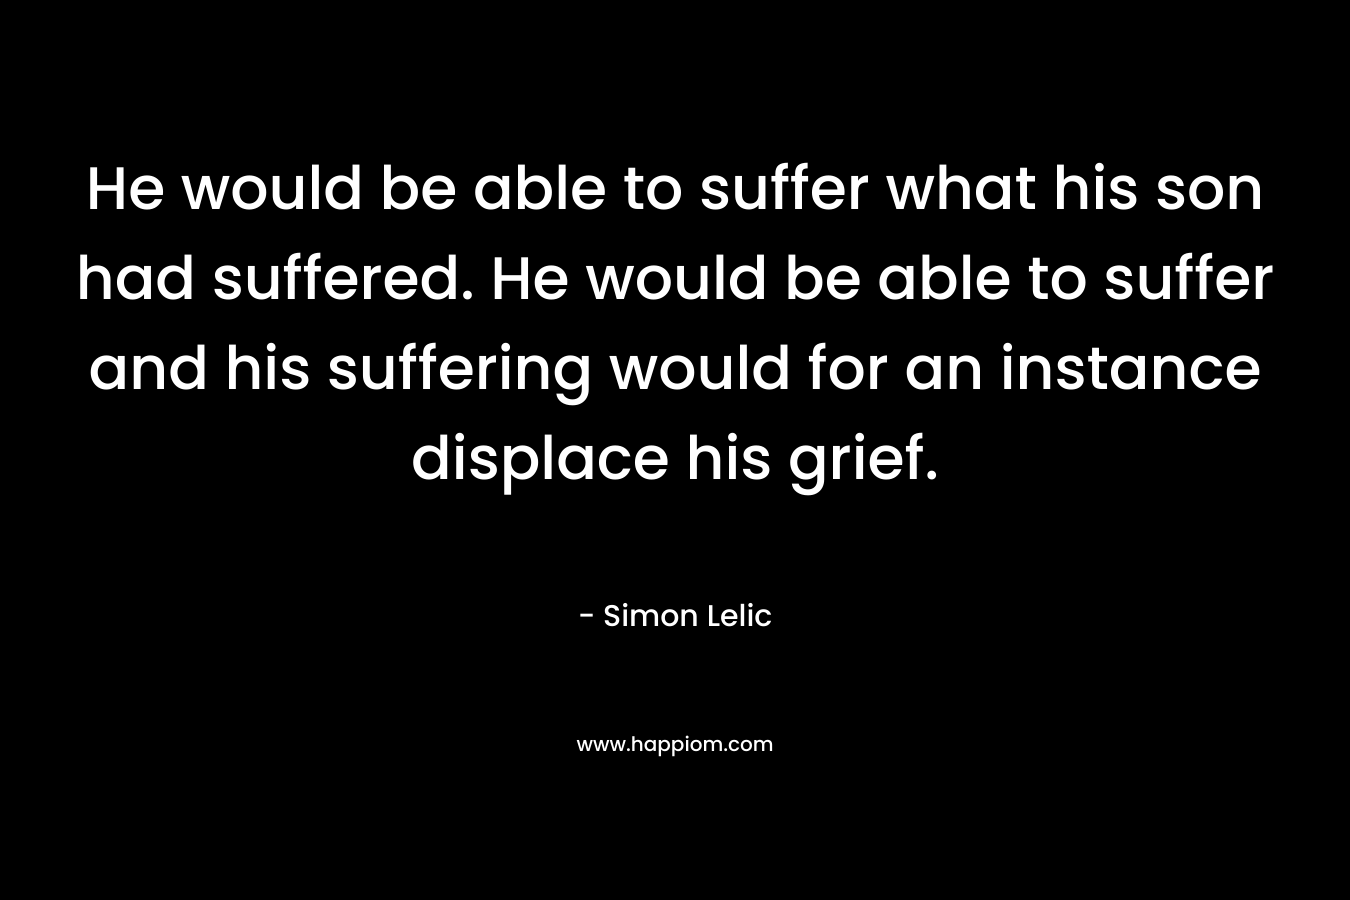 He would be able to suffer what his son had suffered. He would be able to suffer and his suffering would for an instance displace his grief.